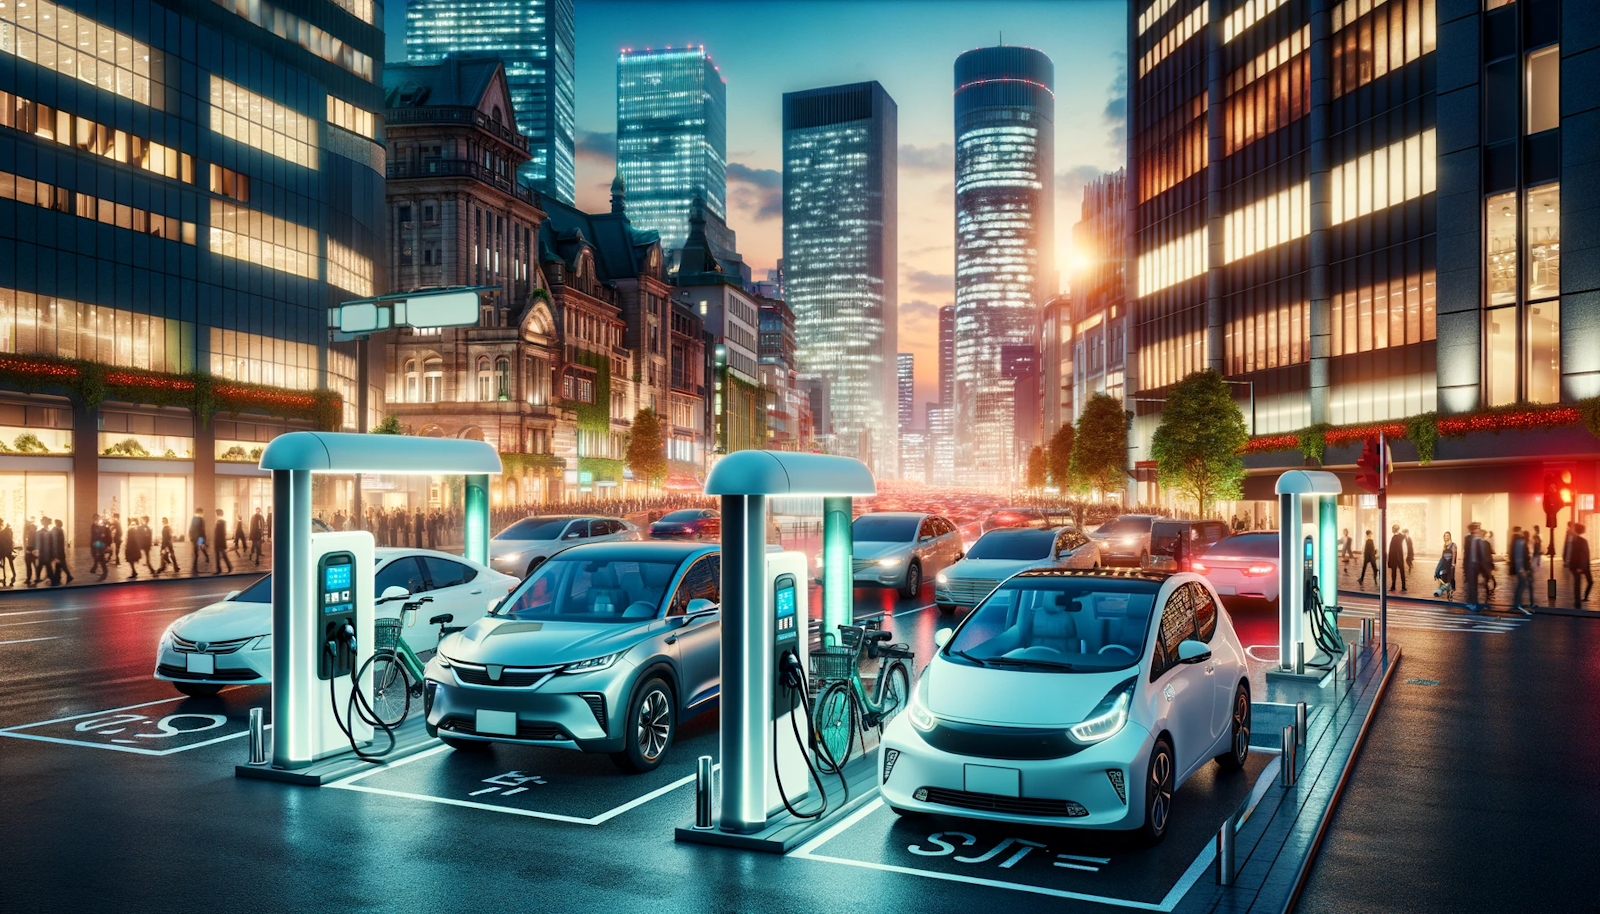 Downtown scene at dusk with an electric vehicle (EV) charging station, various EVs charging, and a vibrant city backdrop, highlighting urban sustainability.